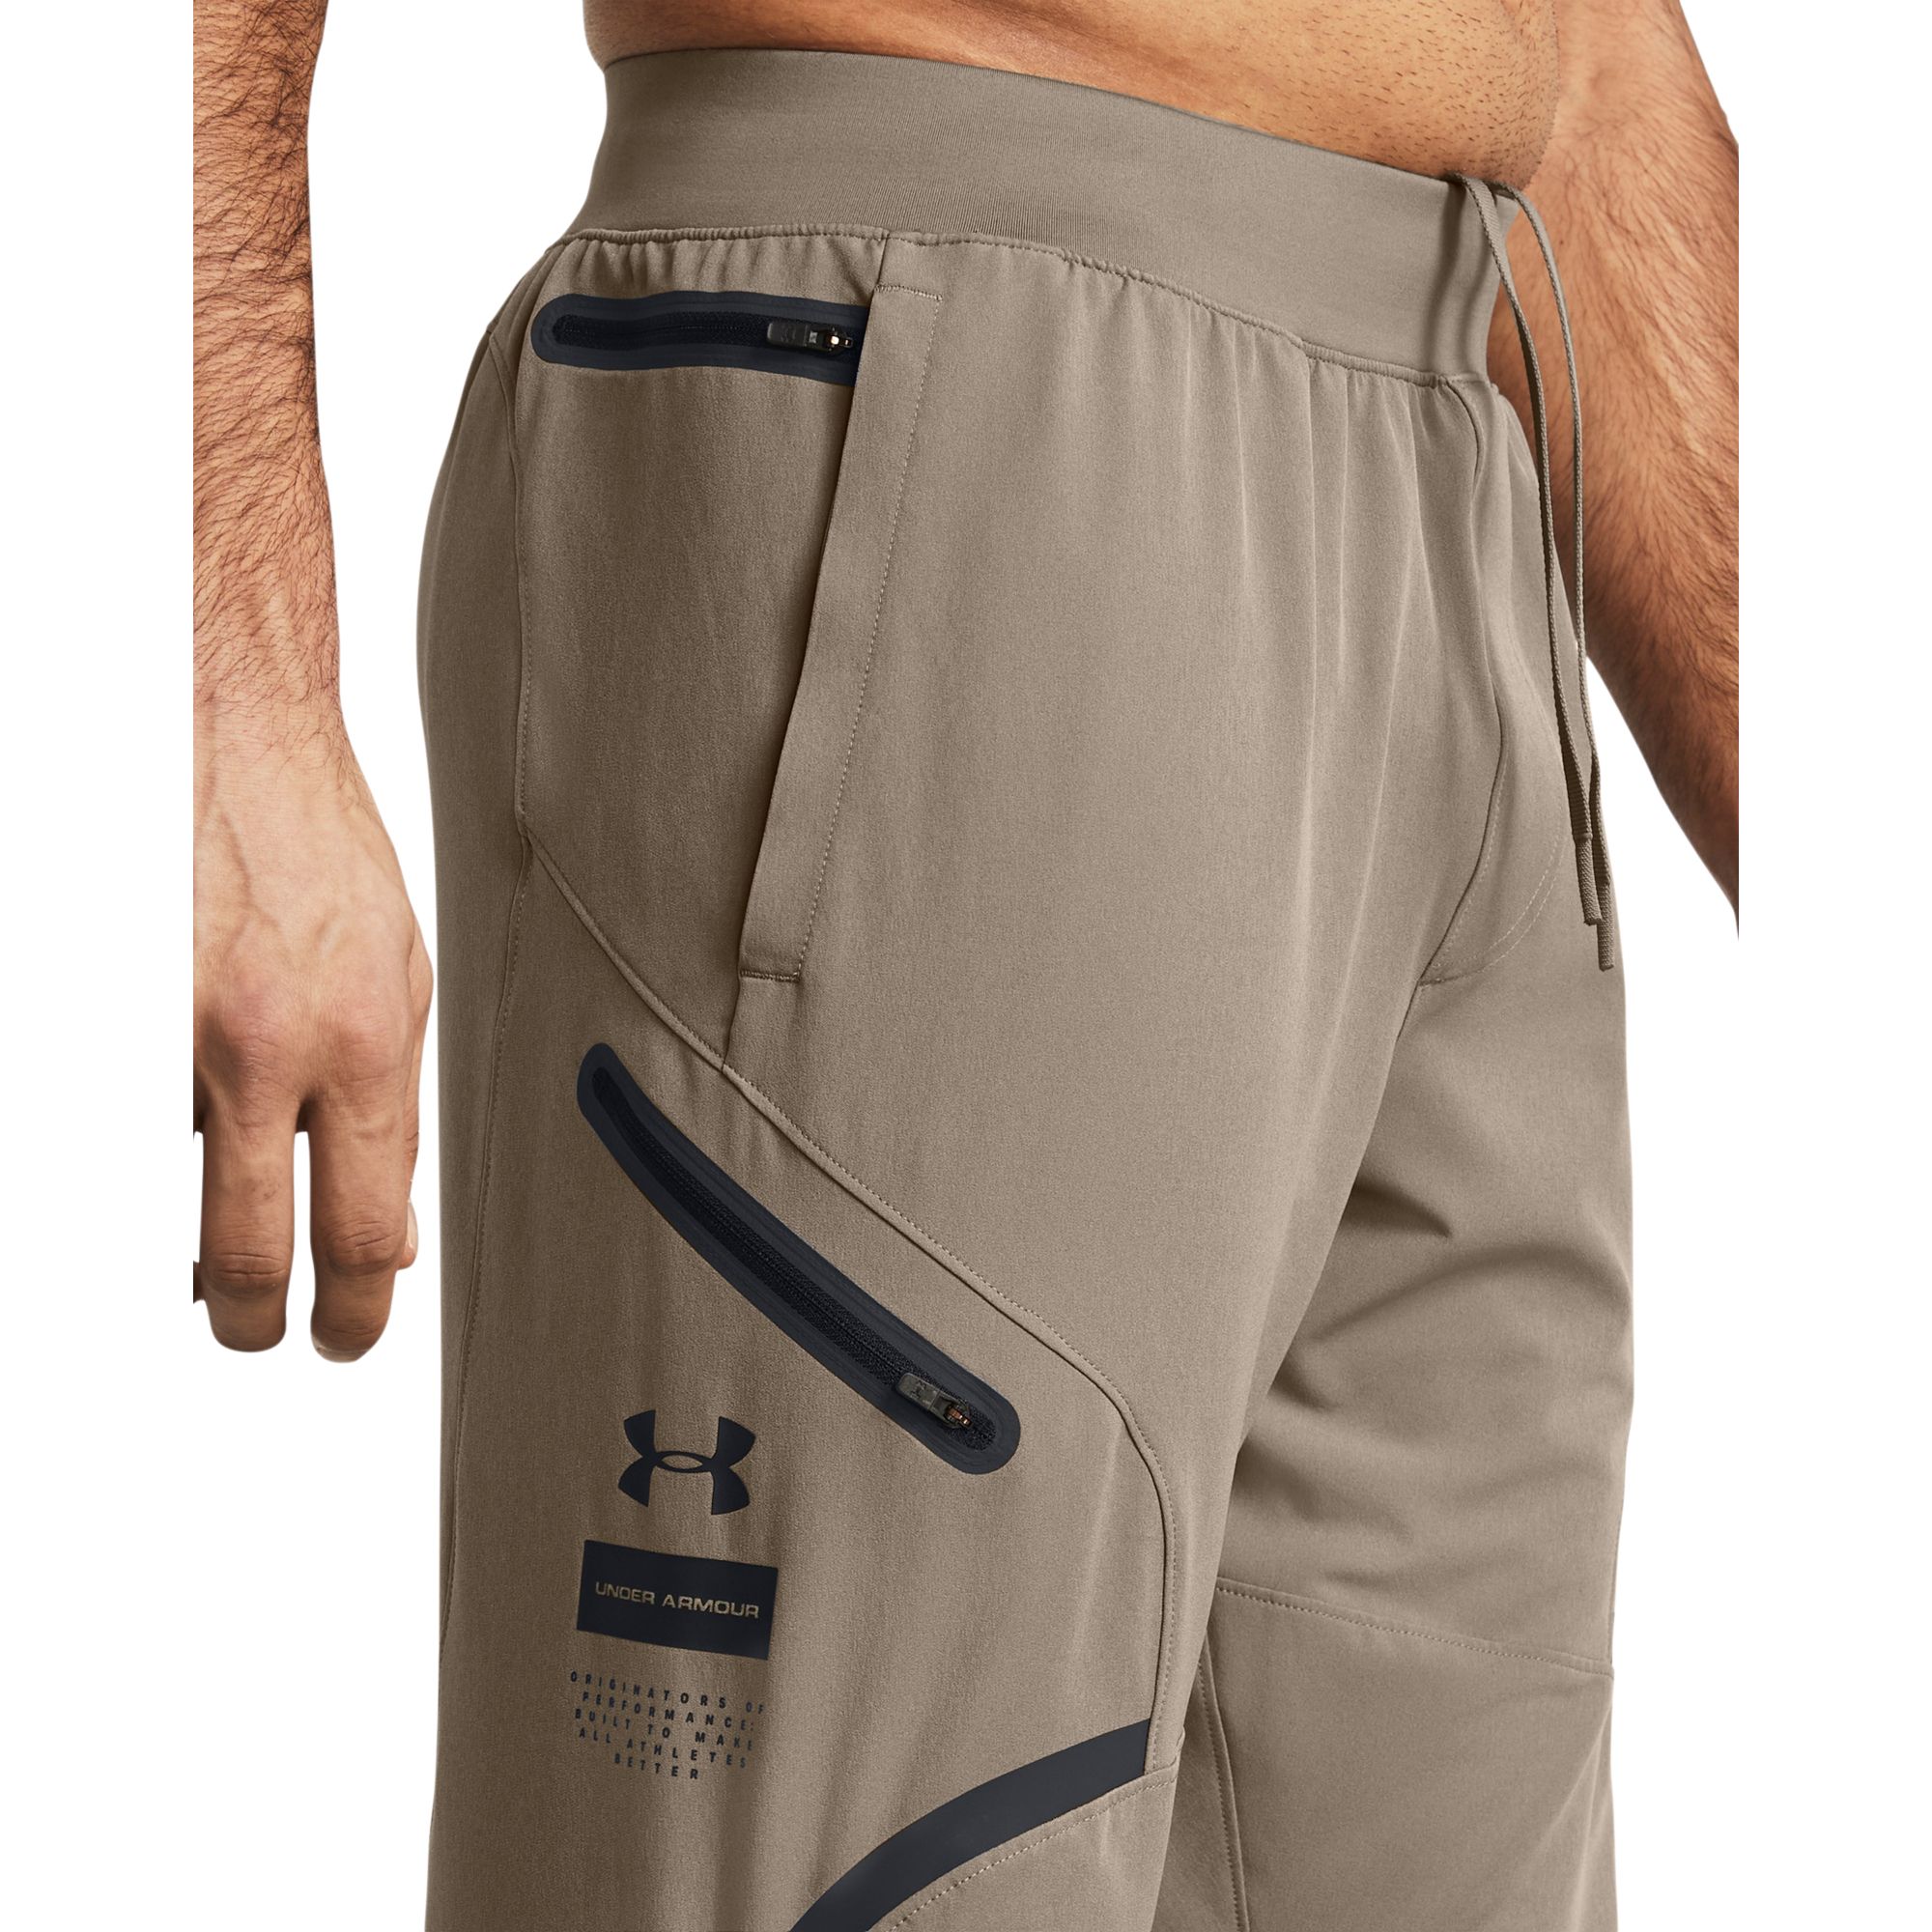 Dick's Sporting Goods Under Armour Men's Unstoppable Cargo Pants